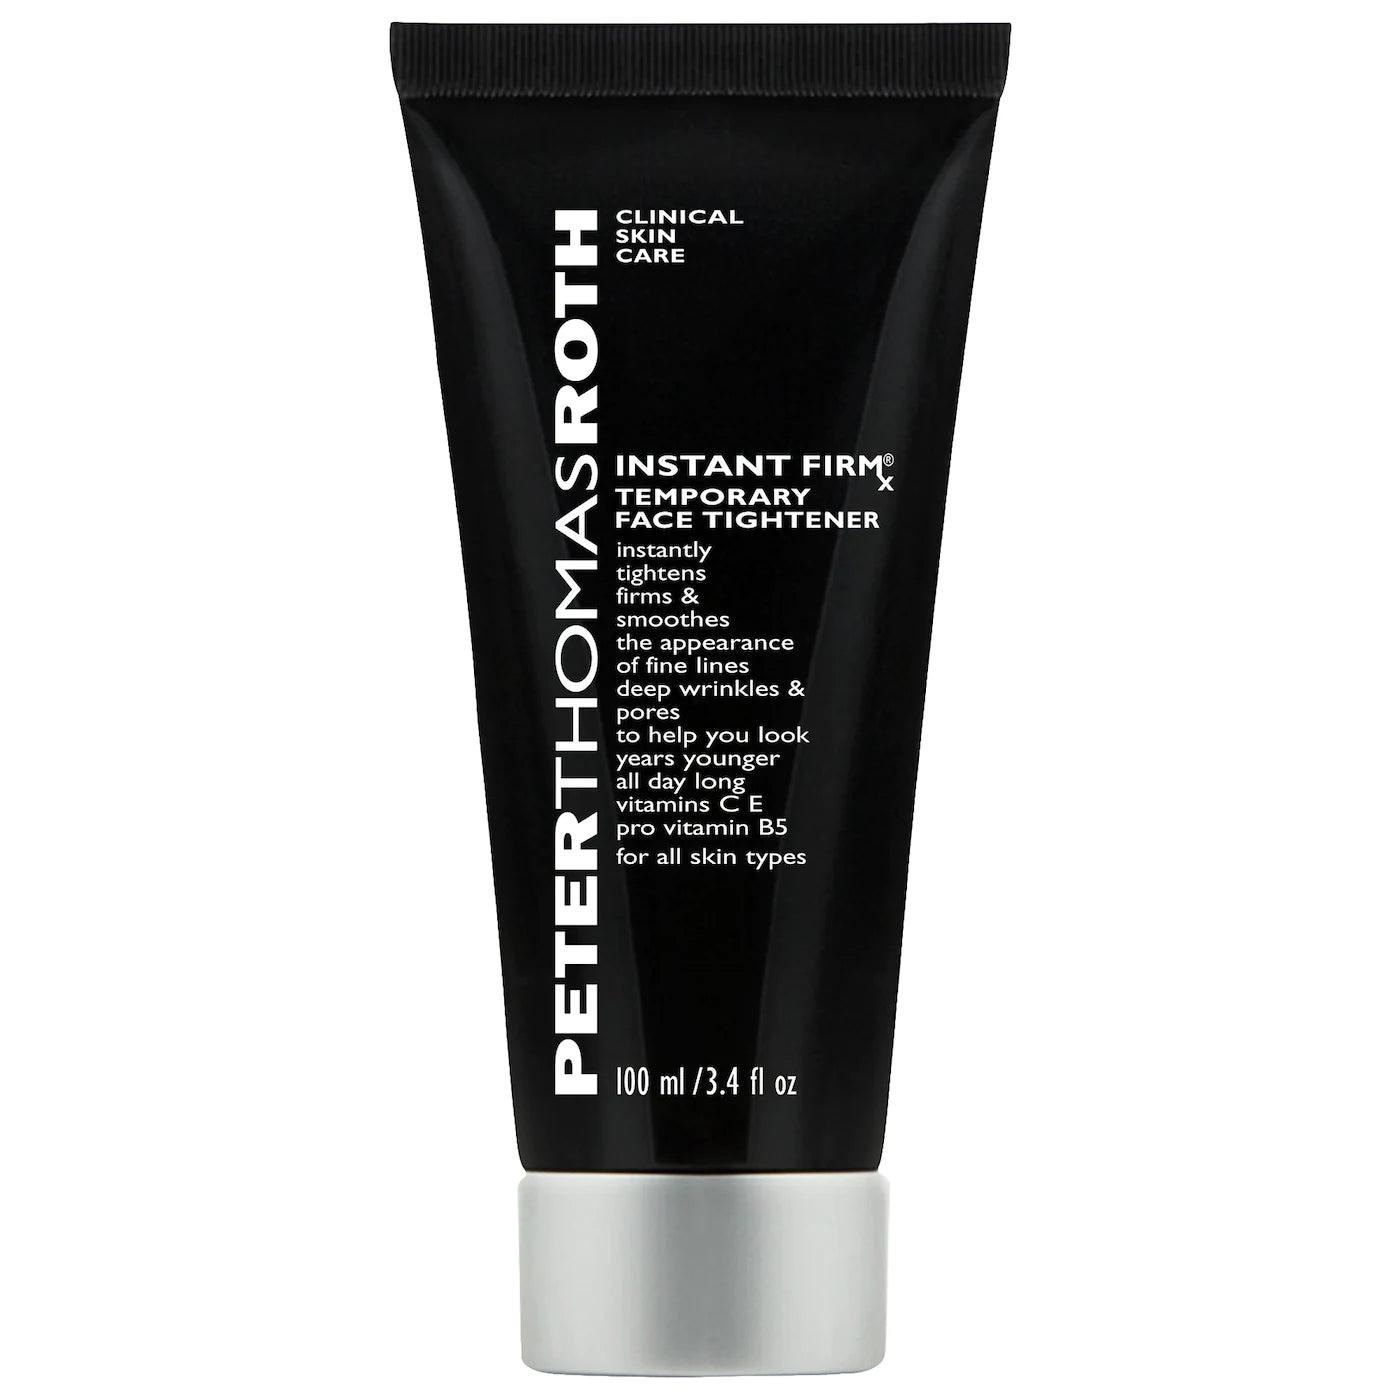 Peter Thomas Roth - Instant FIRMx® Temporary Face Tightener | 100 mL